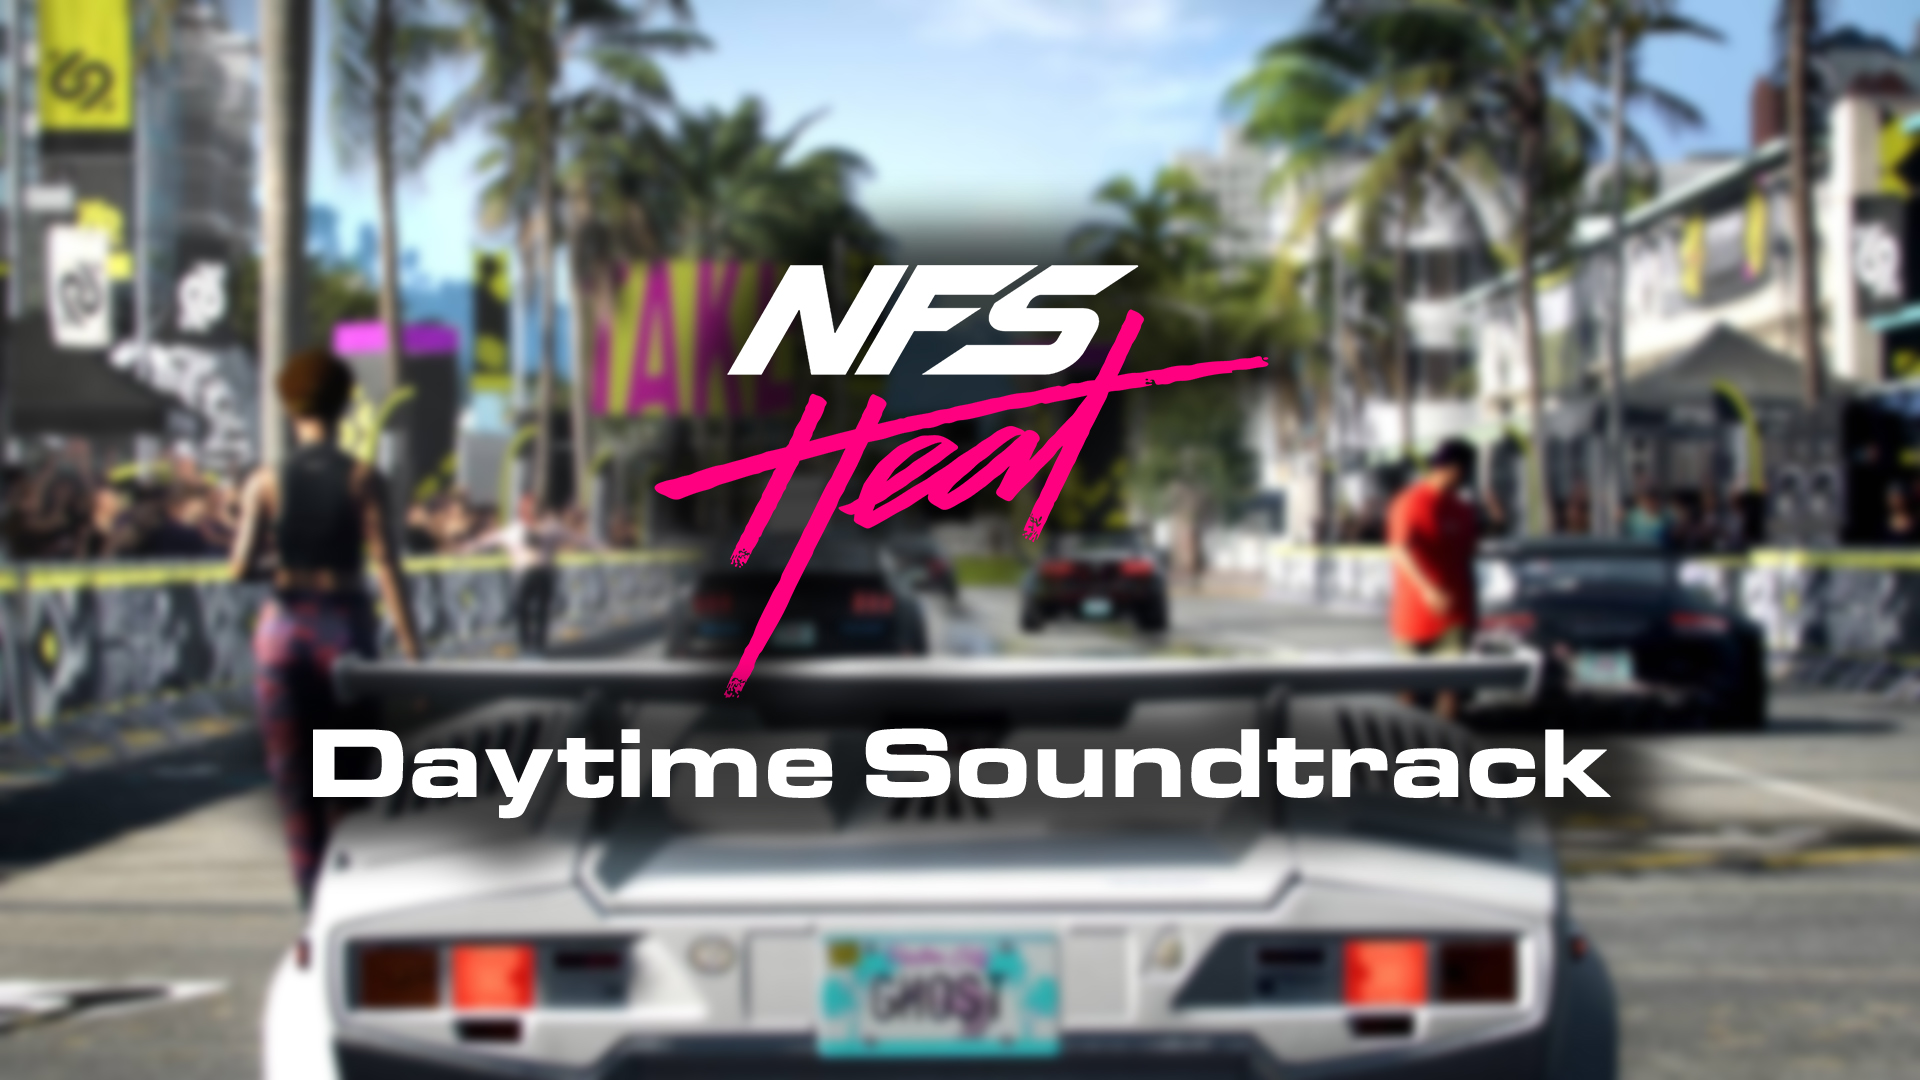 Need For Speed Most Wanted Need for Speed: Heat "Daytime Soundtrack"